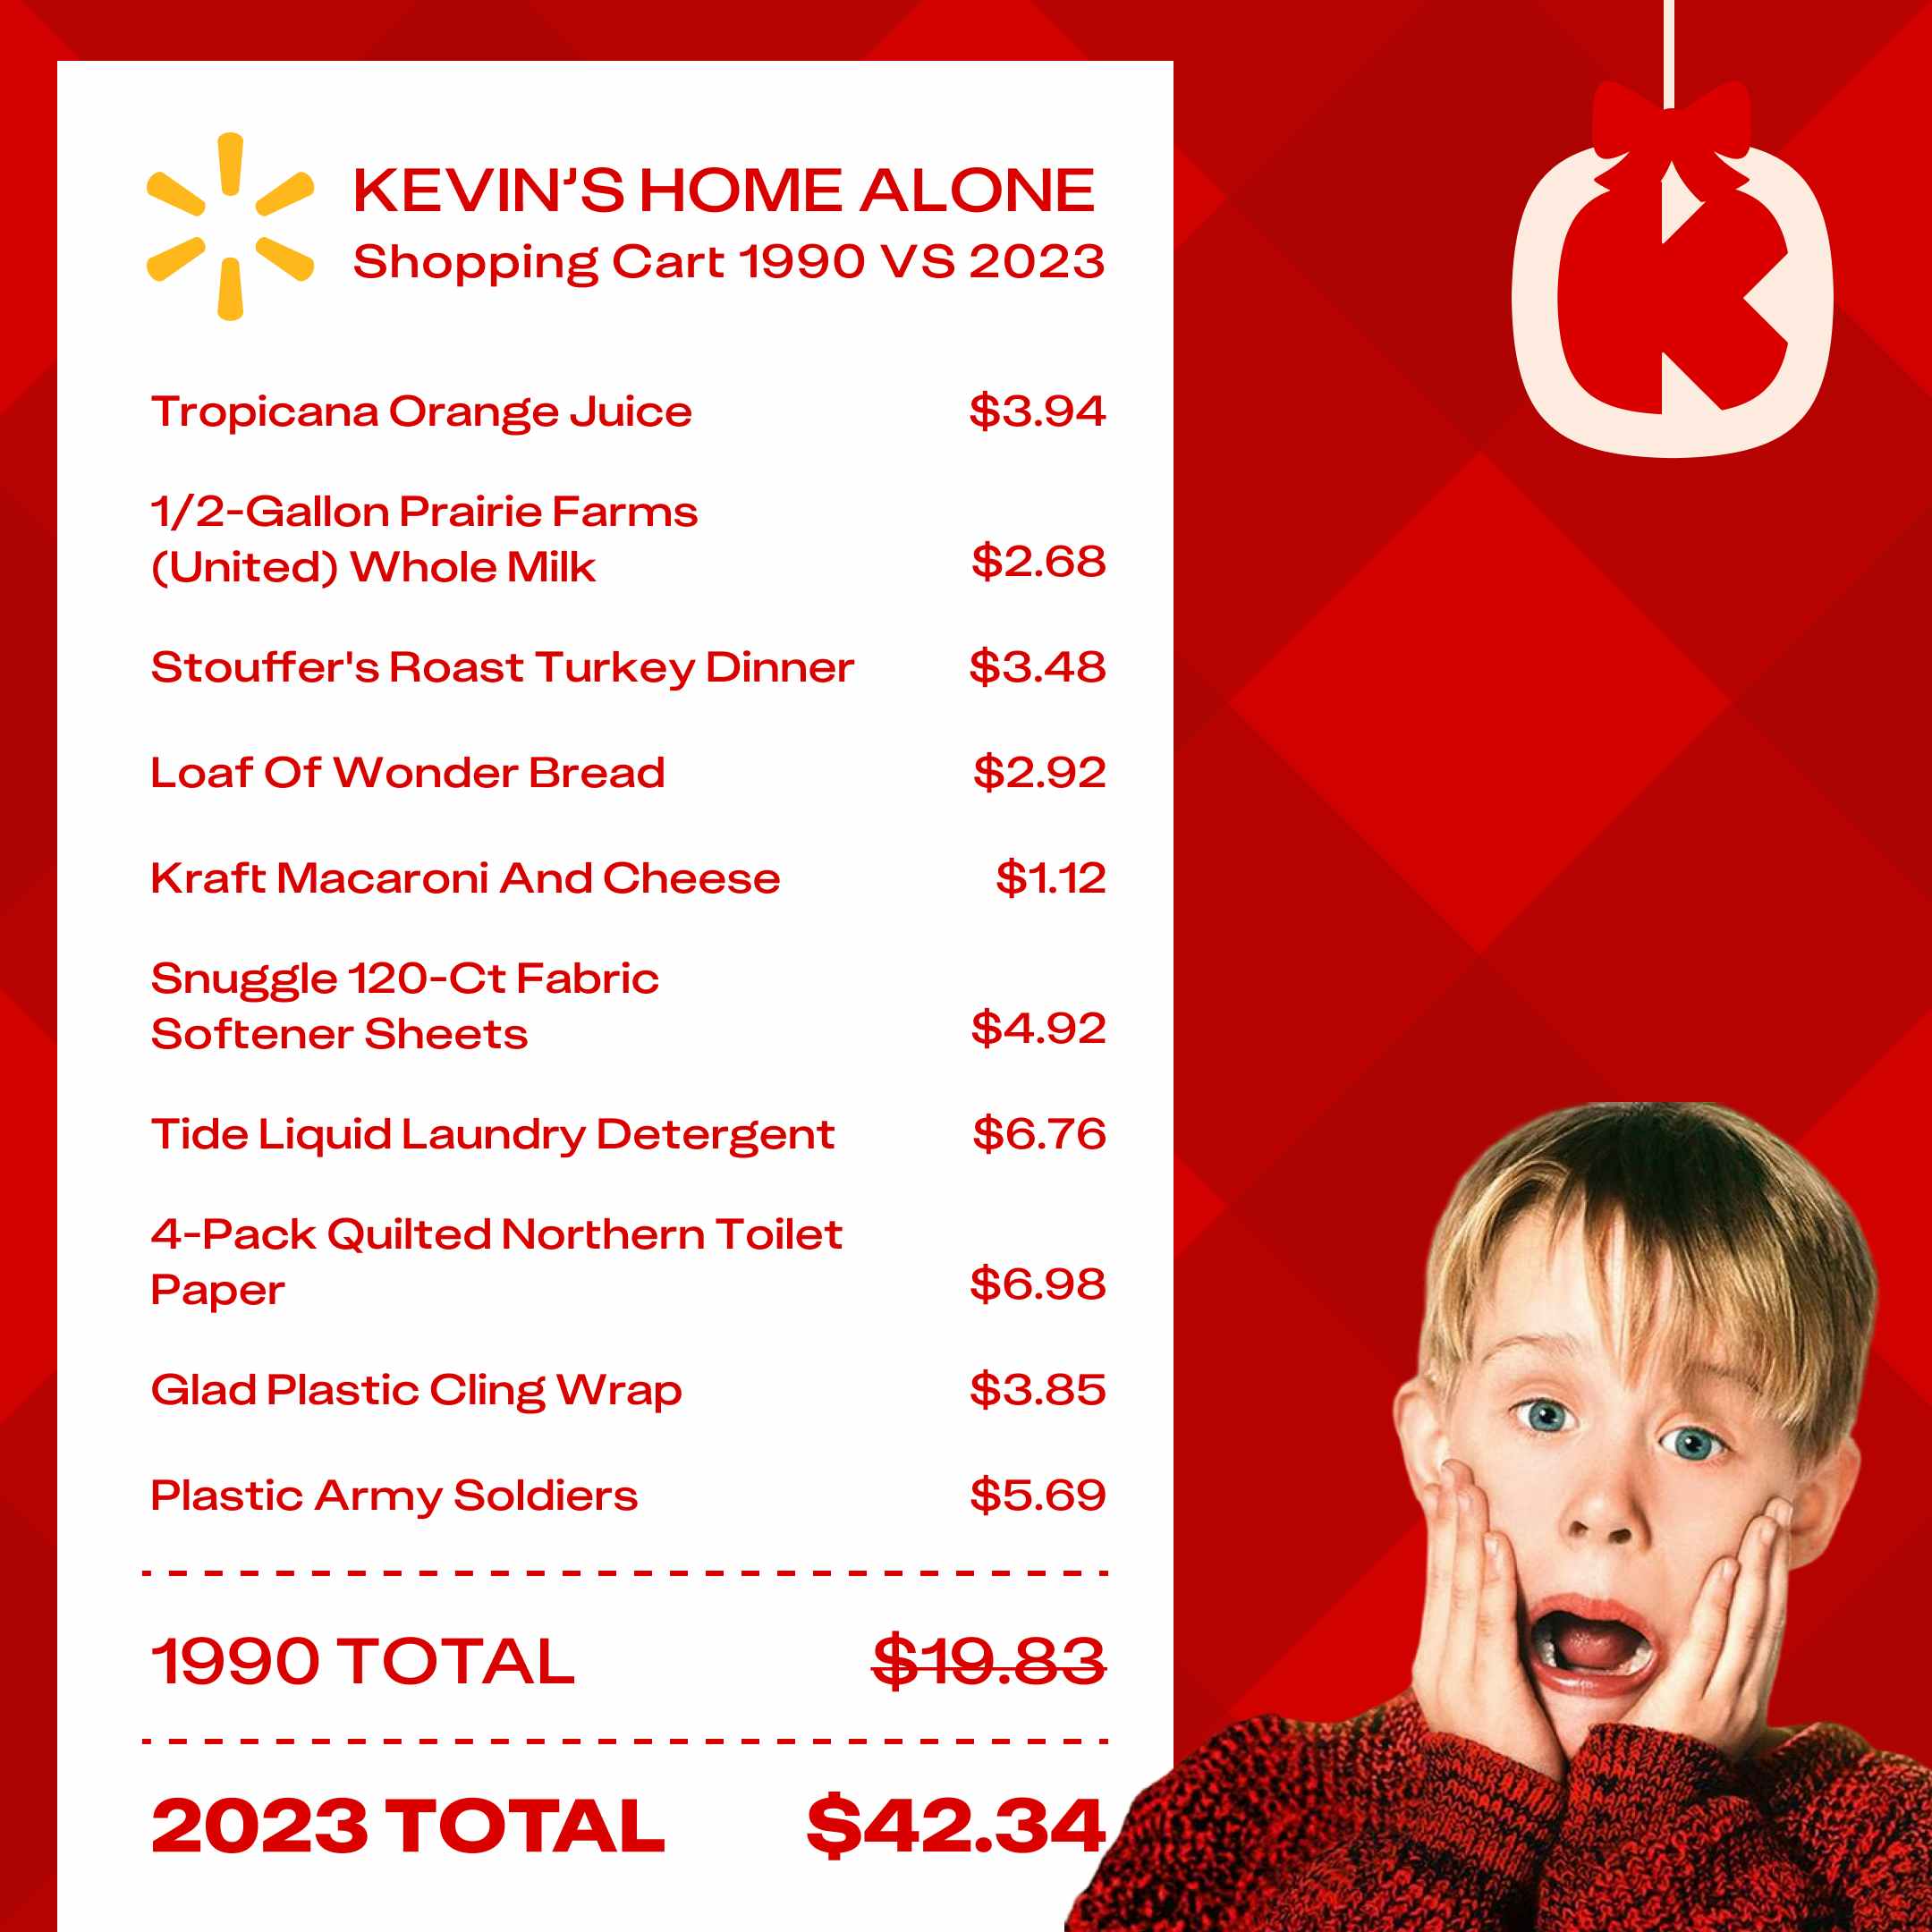 the pricing for items in the Home Alone shopping cart